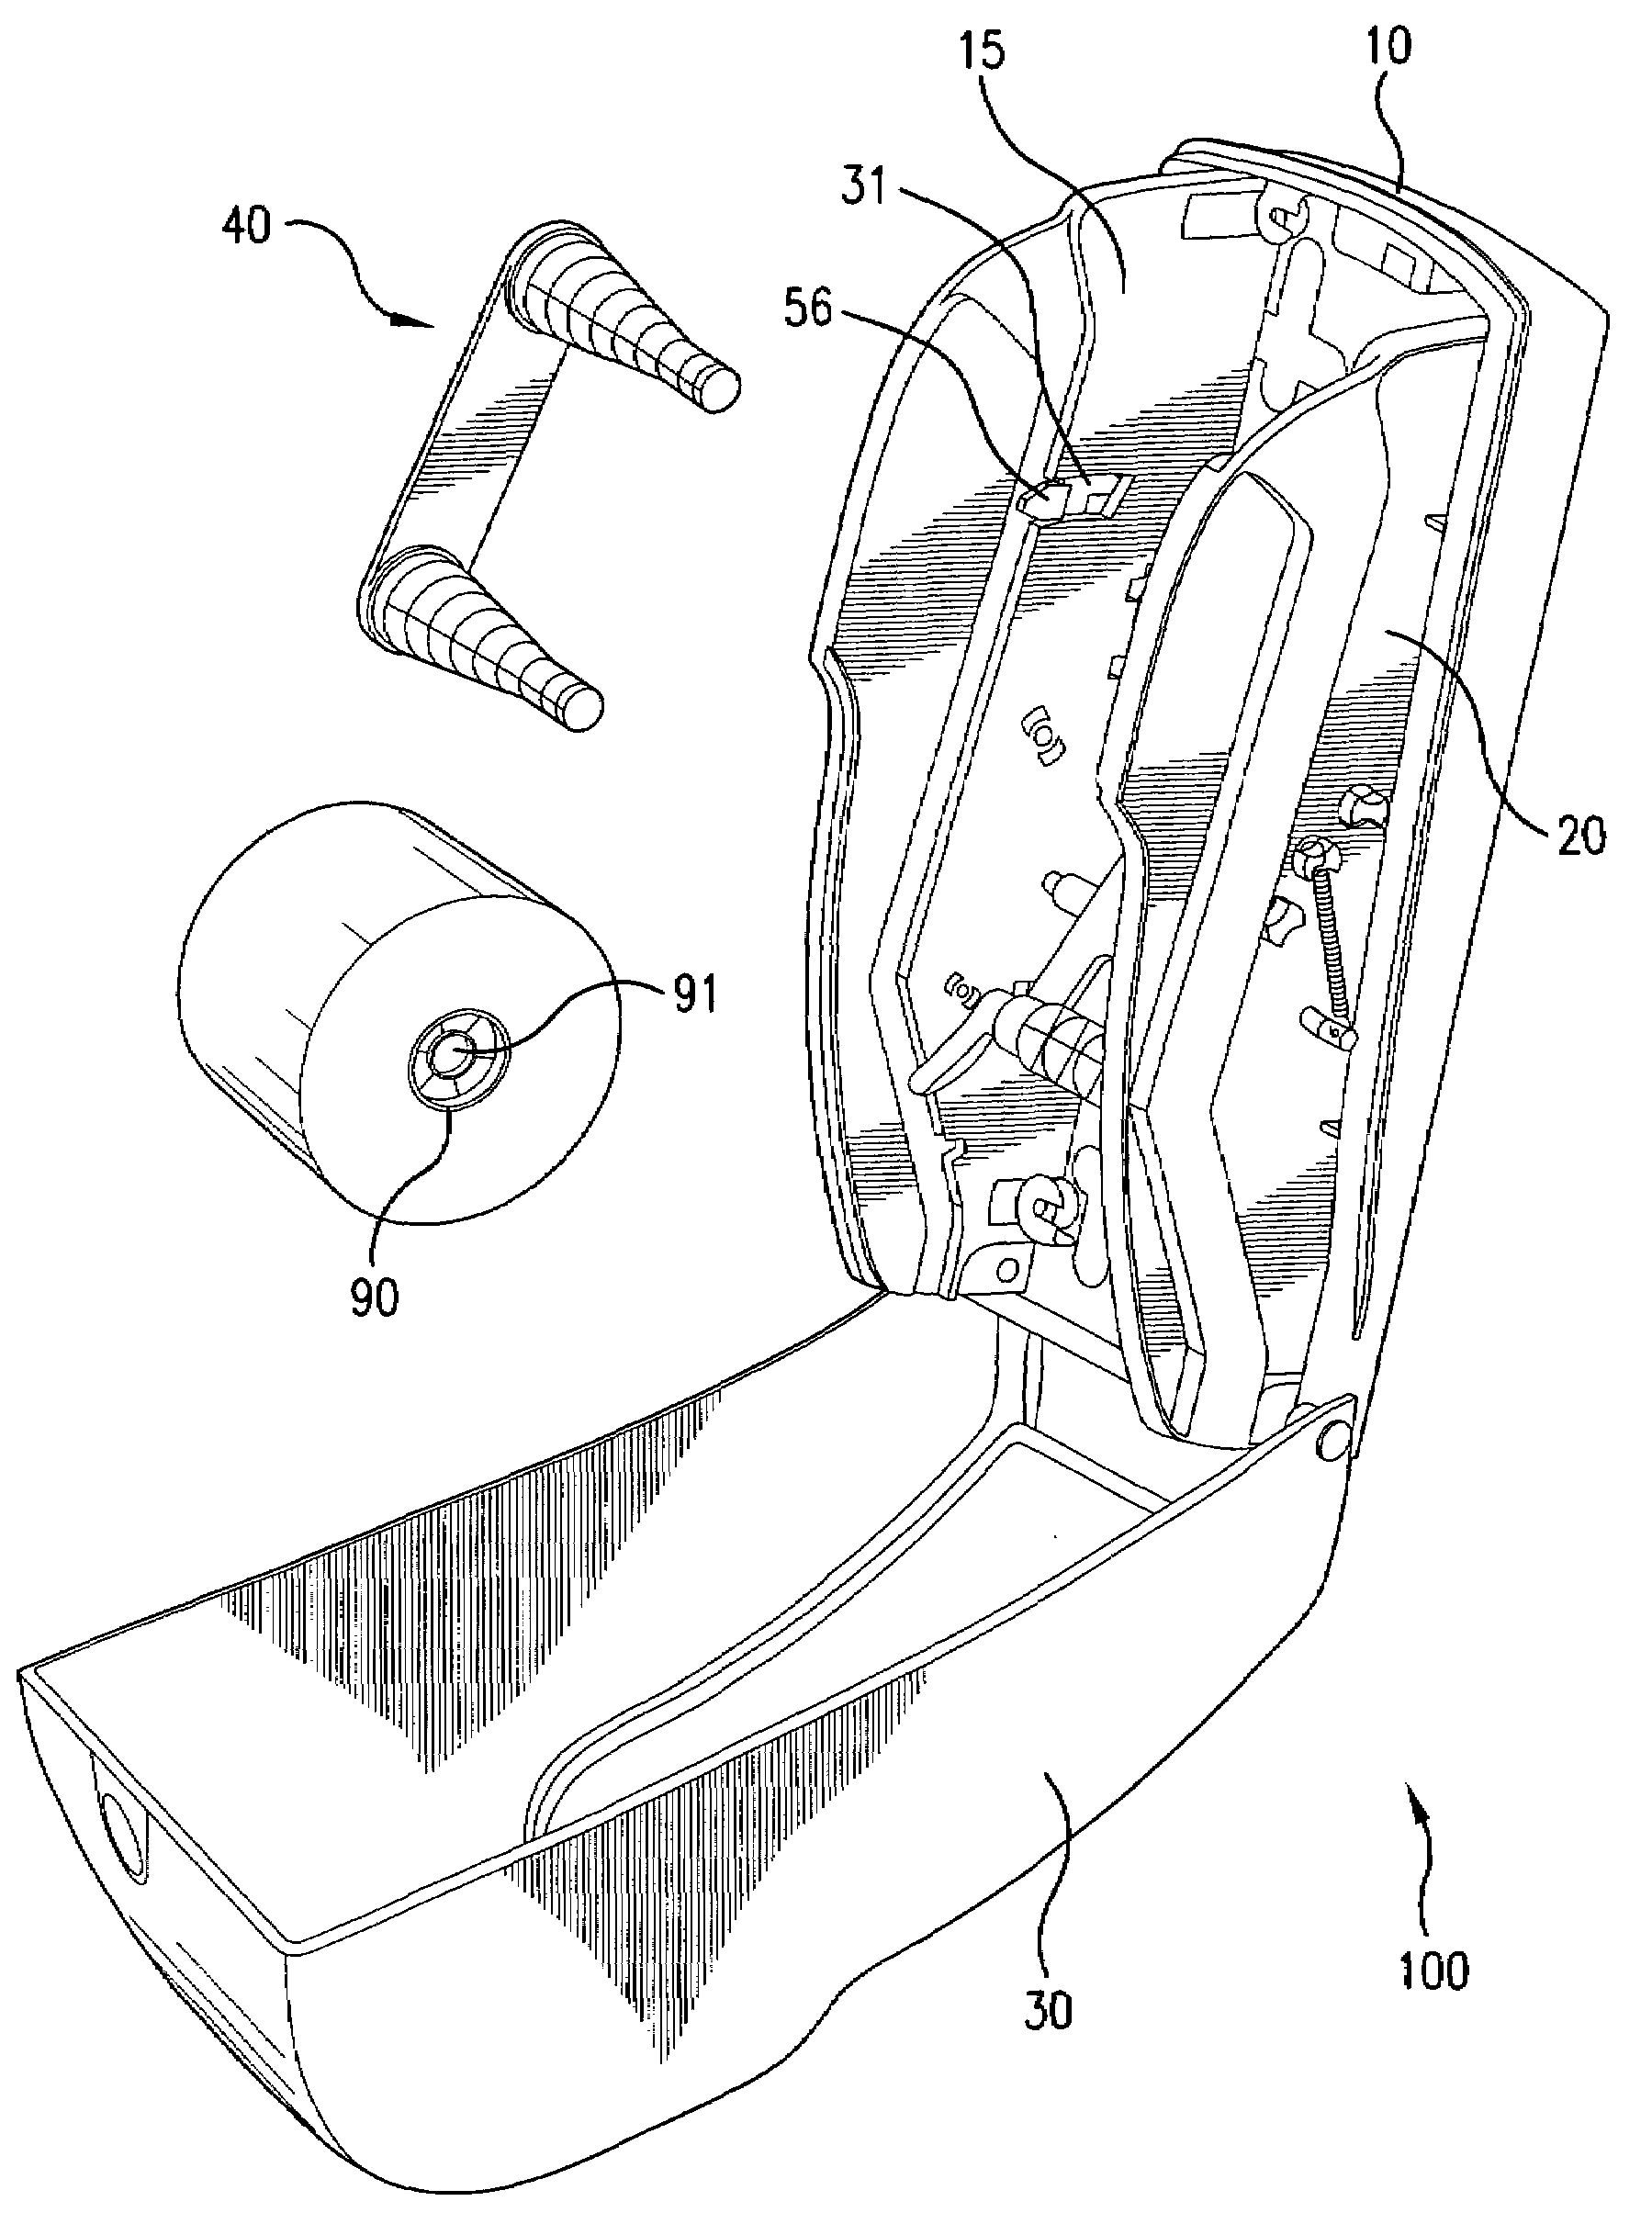 Dispenser that automatically transfers rolls of absorbent material, method of reloading same, and rolls of absorbent material for use in same